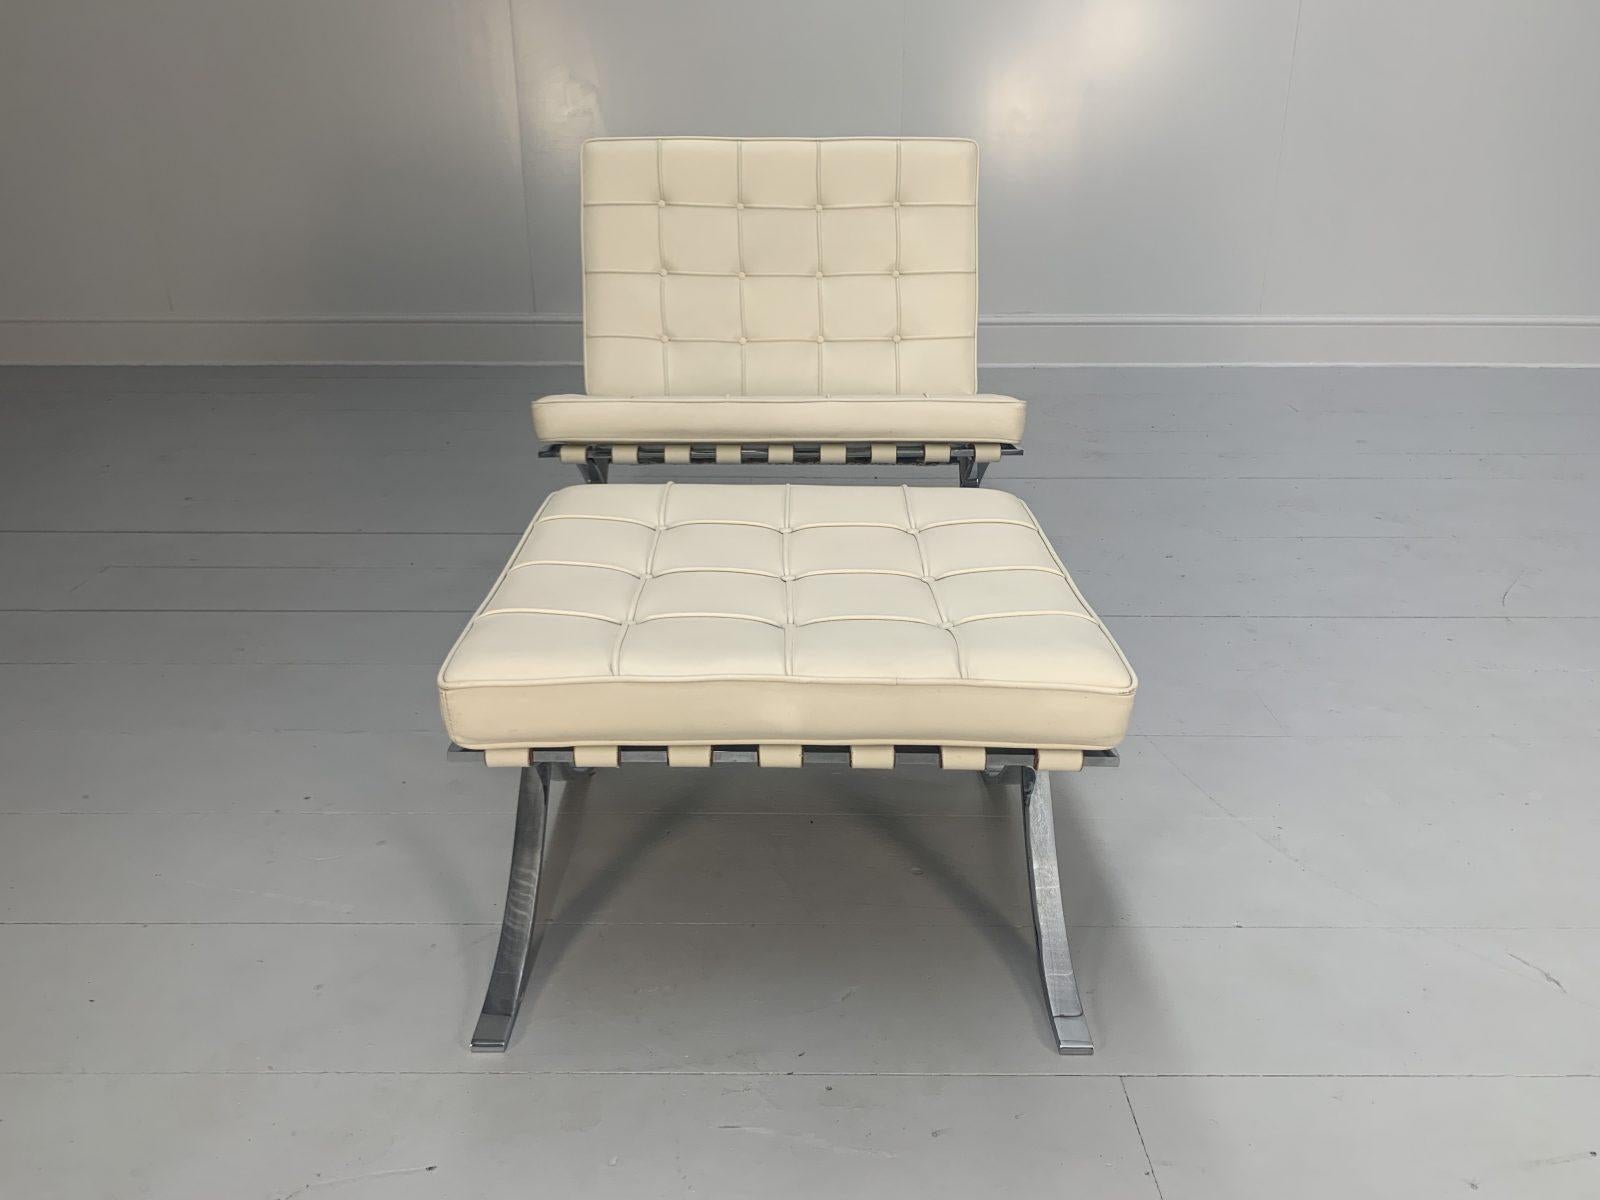 Knoll Studio “Barcelona” Lounge Chair & Ottoman” Suite in Ivory Leather 1